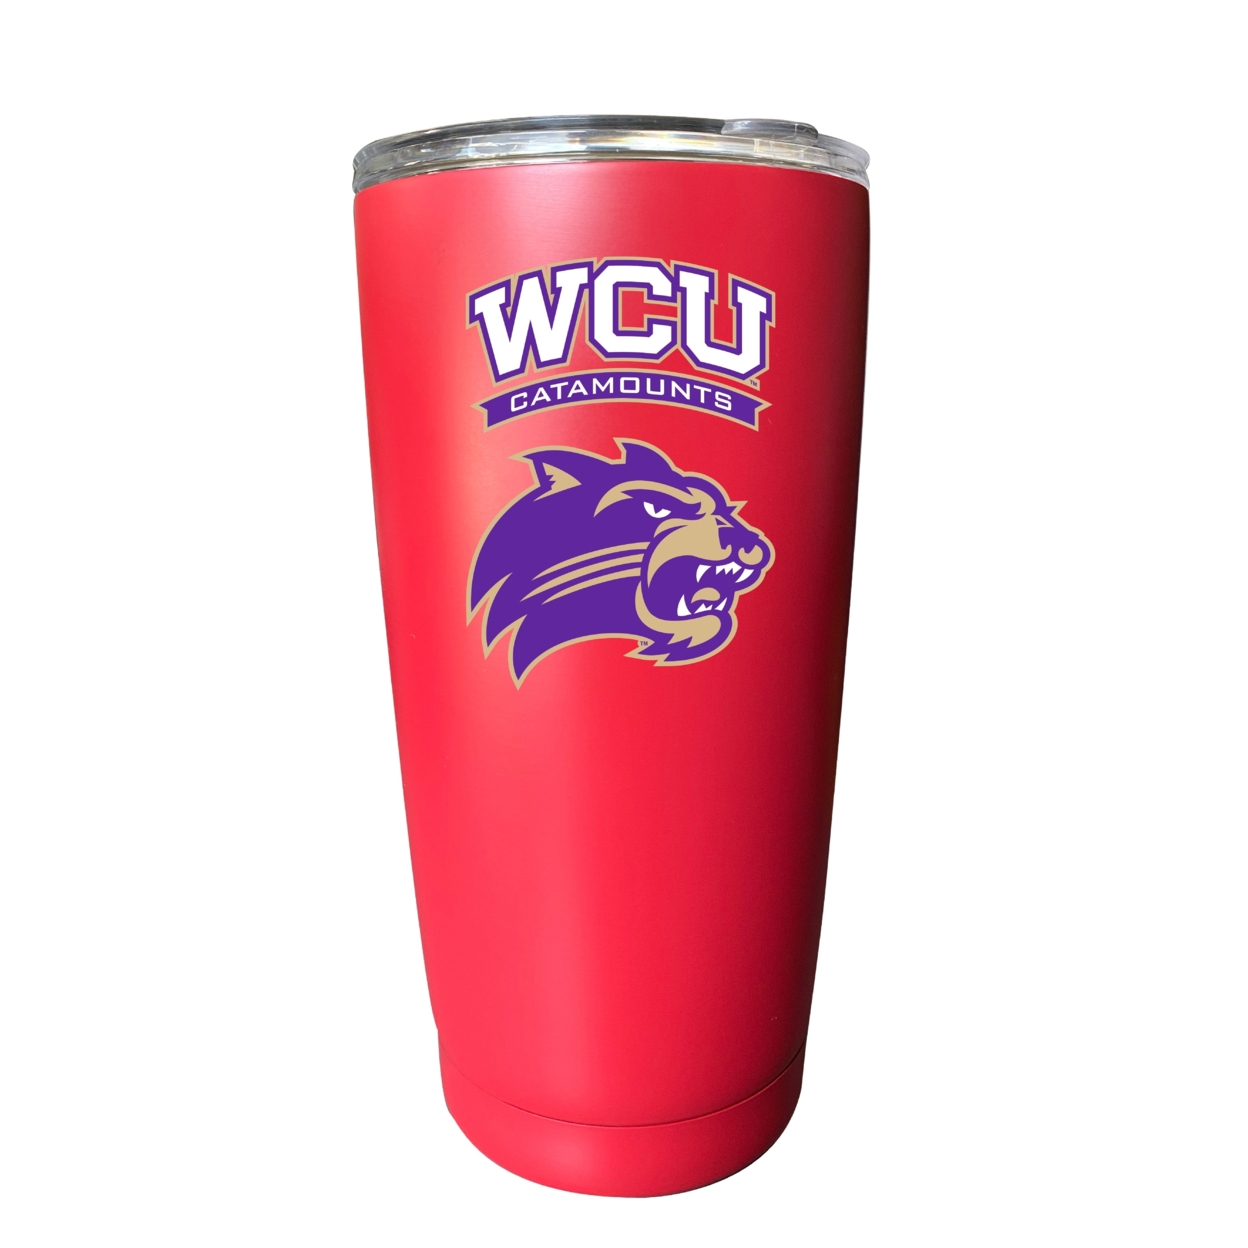 Western Carolina University 16 Oz Insulated Stainless Steel Tumbler - Choose Your Color. - Red